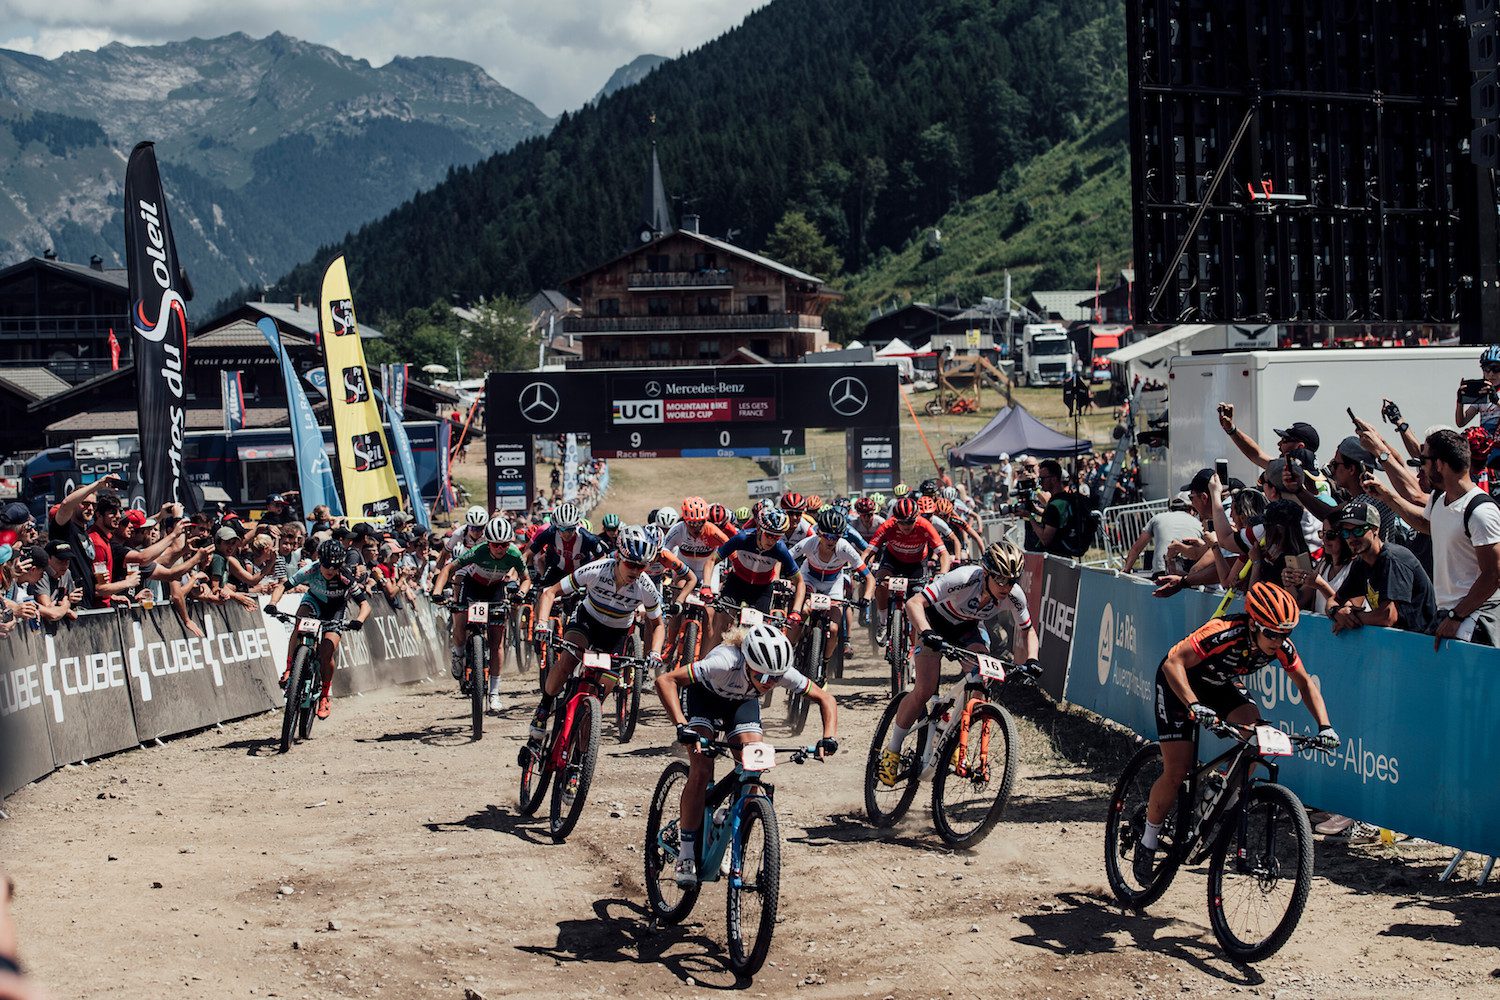 Les Gets World Cup XCO 2019 women's start